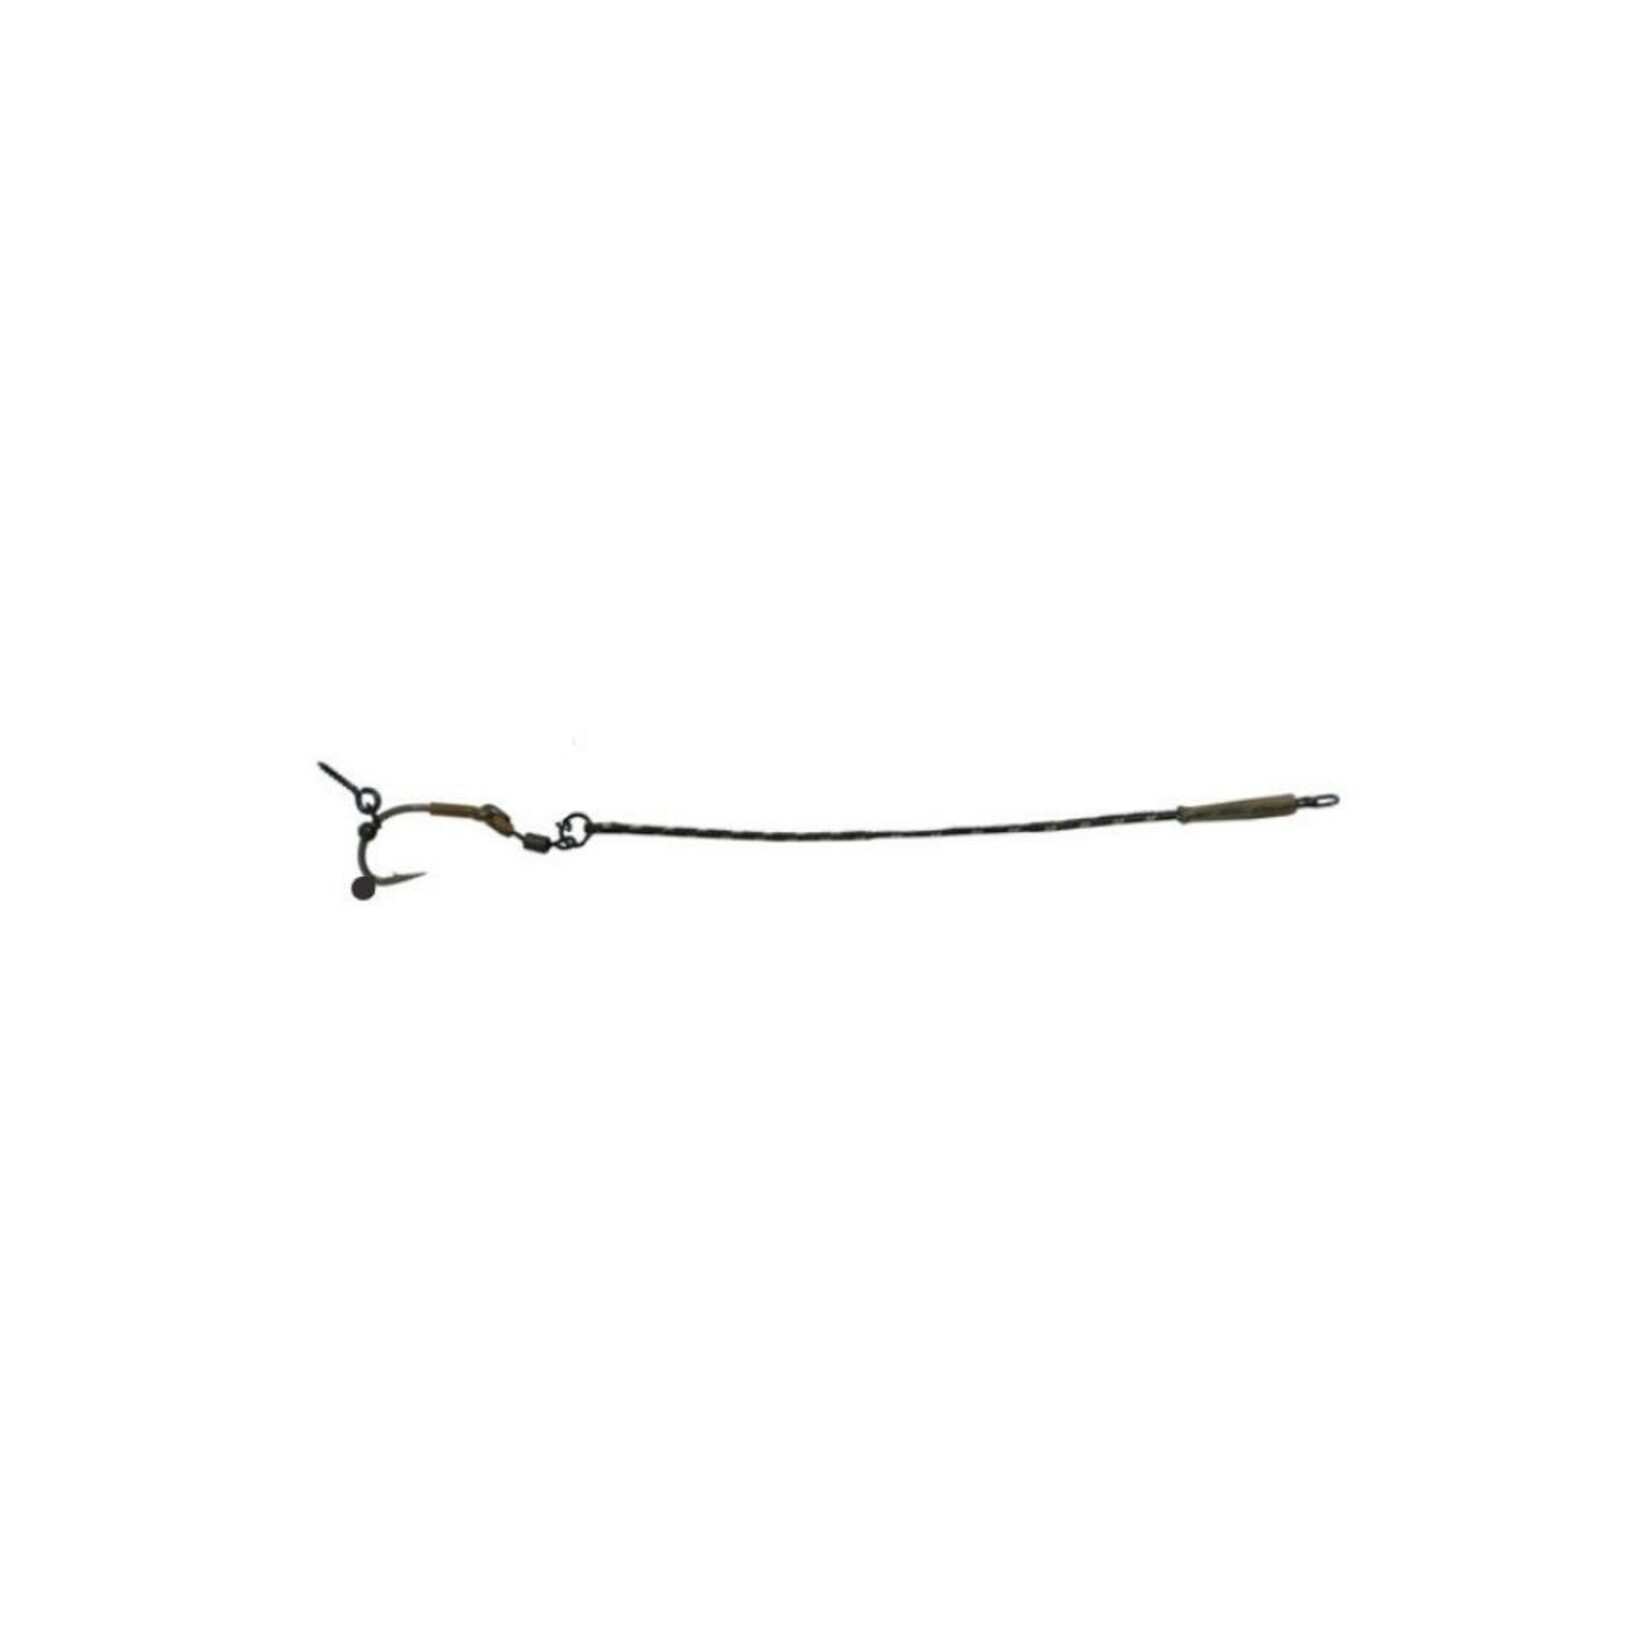 Baitsolutions Dutch Ace Loaded Rig size 4 - 1 pc